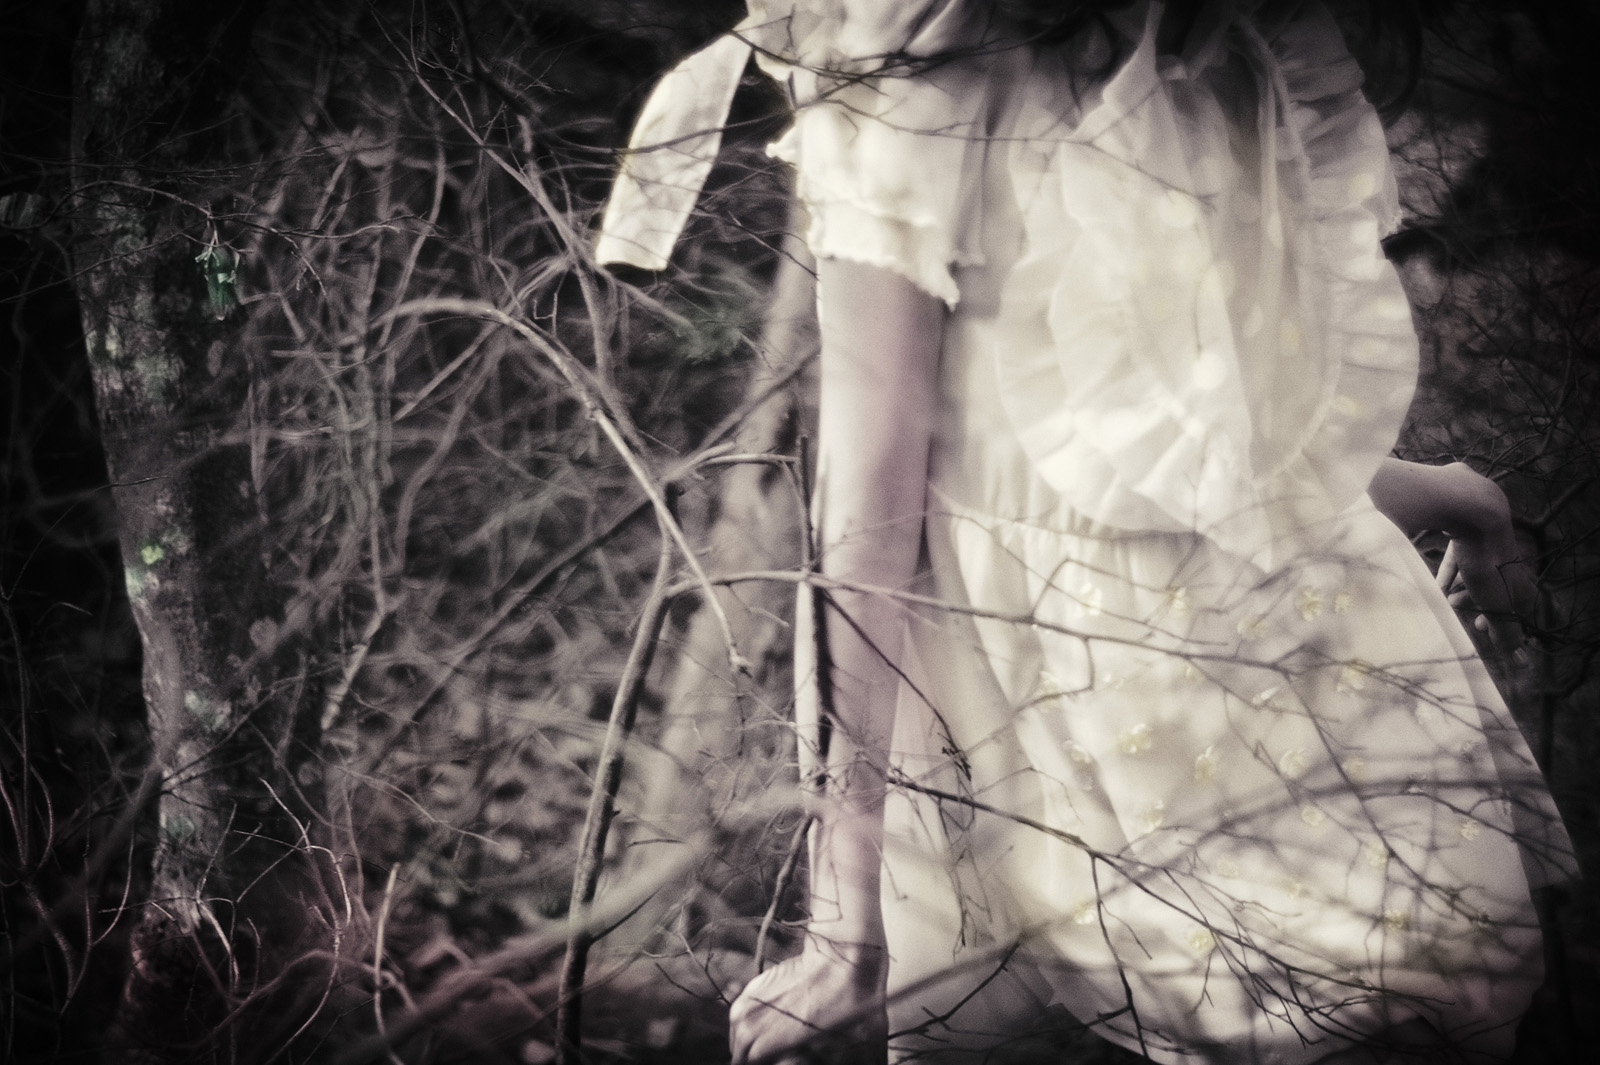 Lost in the bush - two, mid shot detail - Fashion Photography on Location by Kent Johnson, Alice's Dreamtime, The Dream.